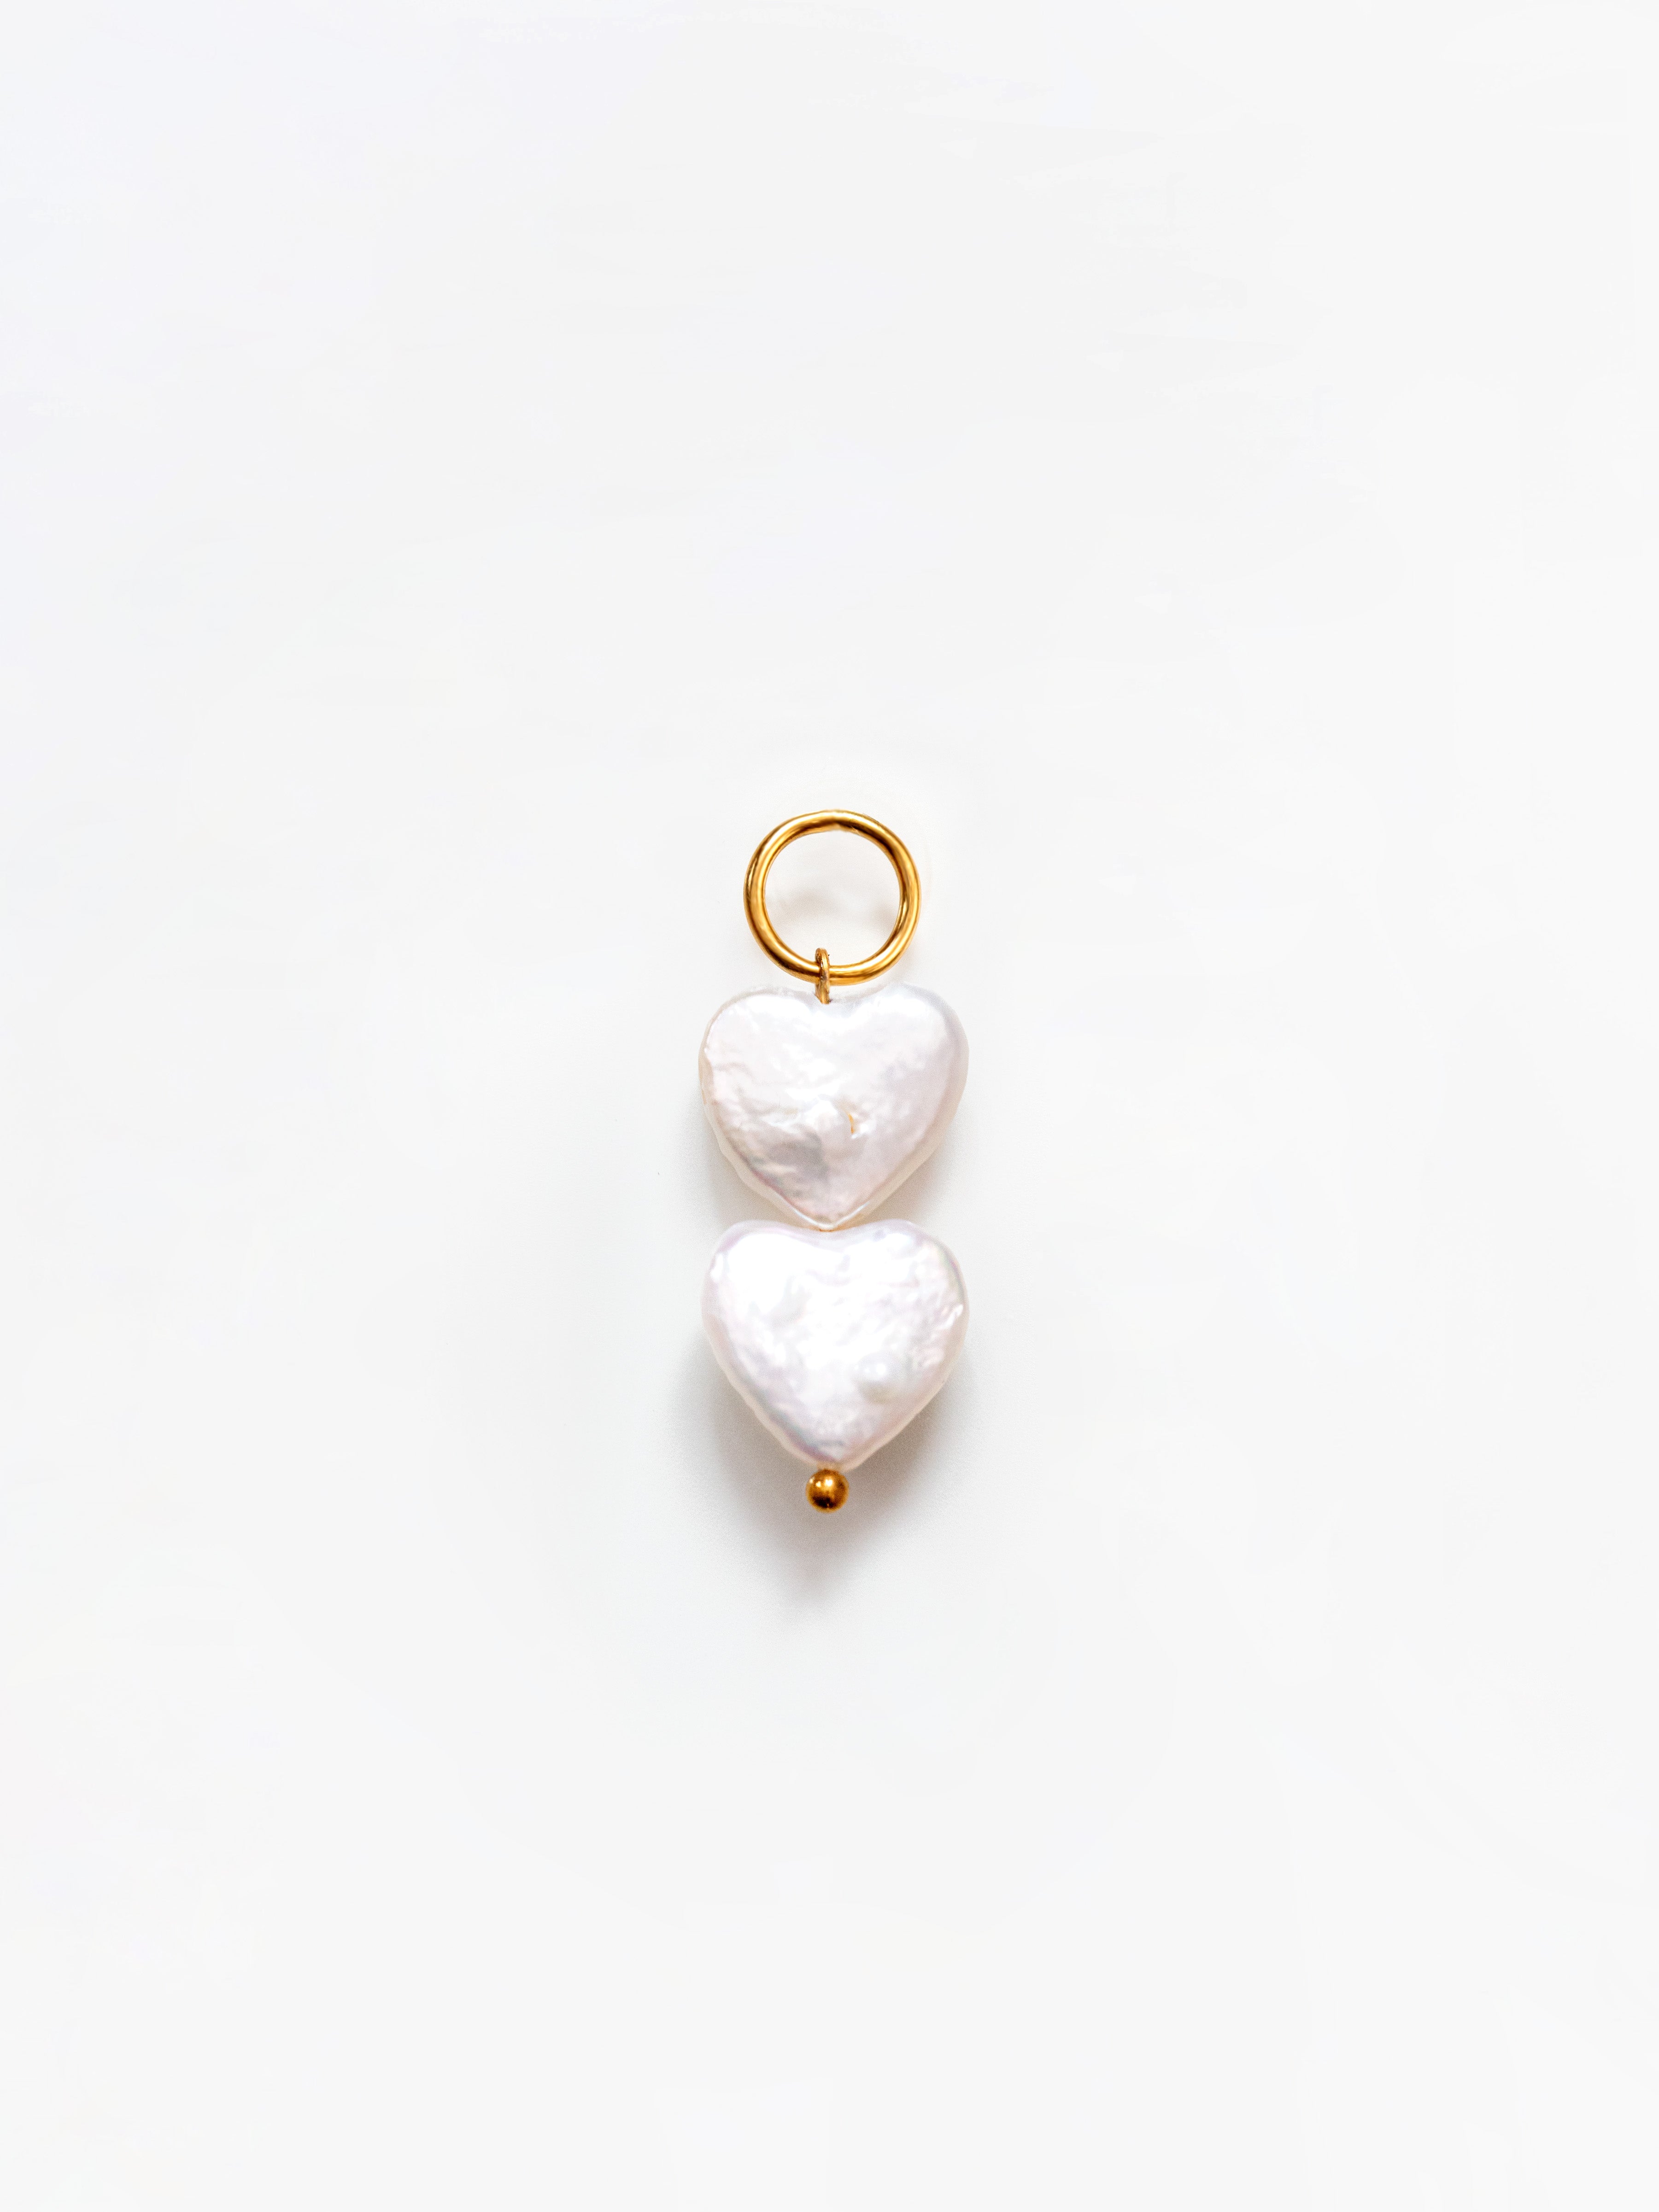 Gold Heart Pendant / Charm With Two Heart Stones